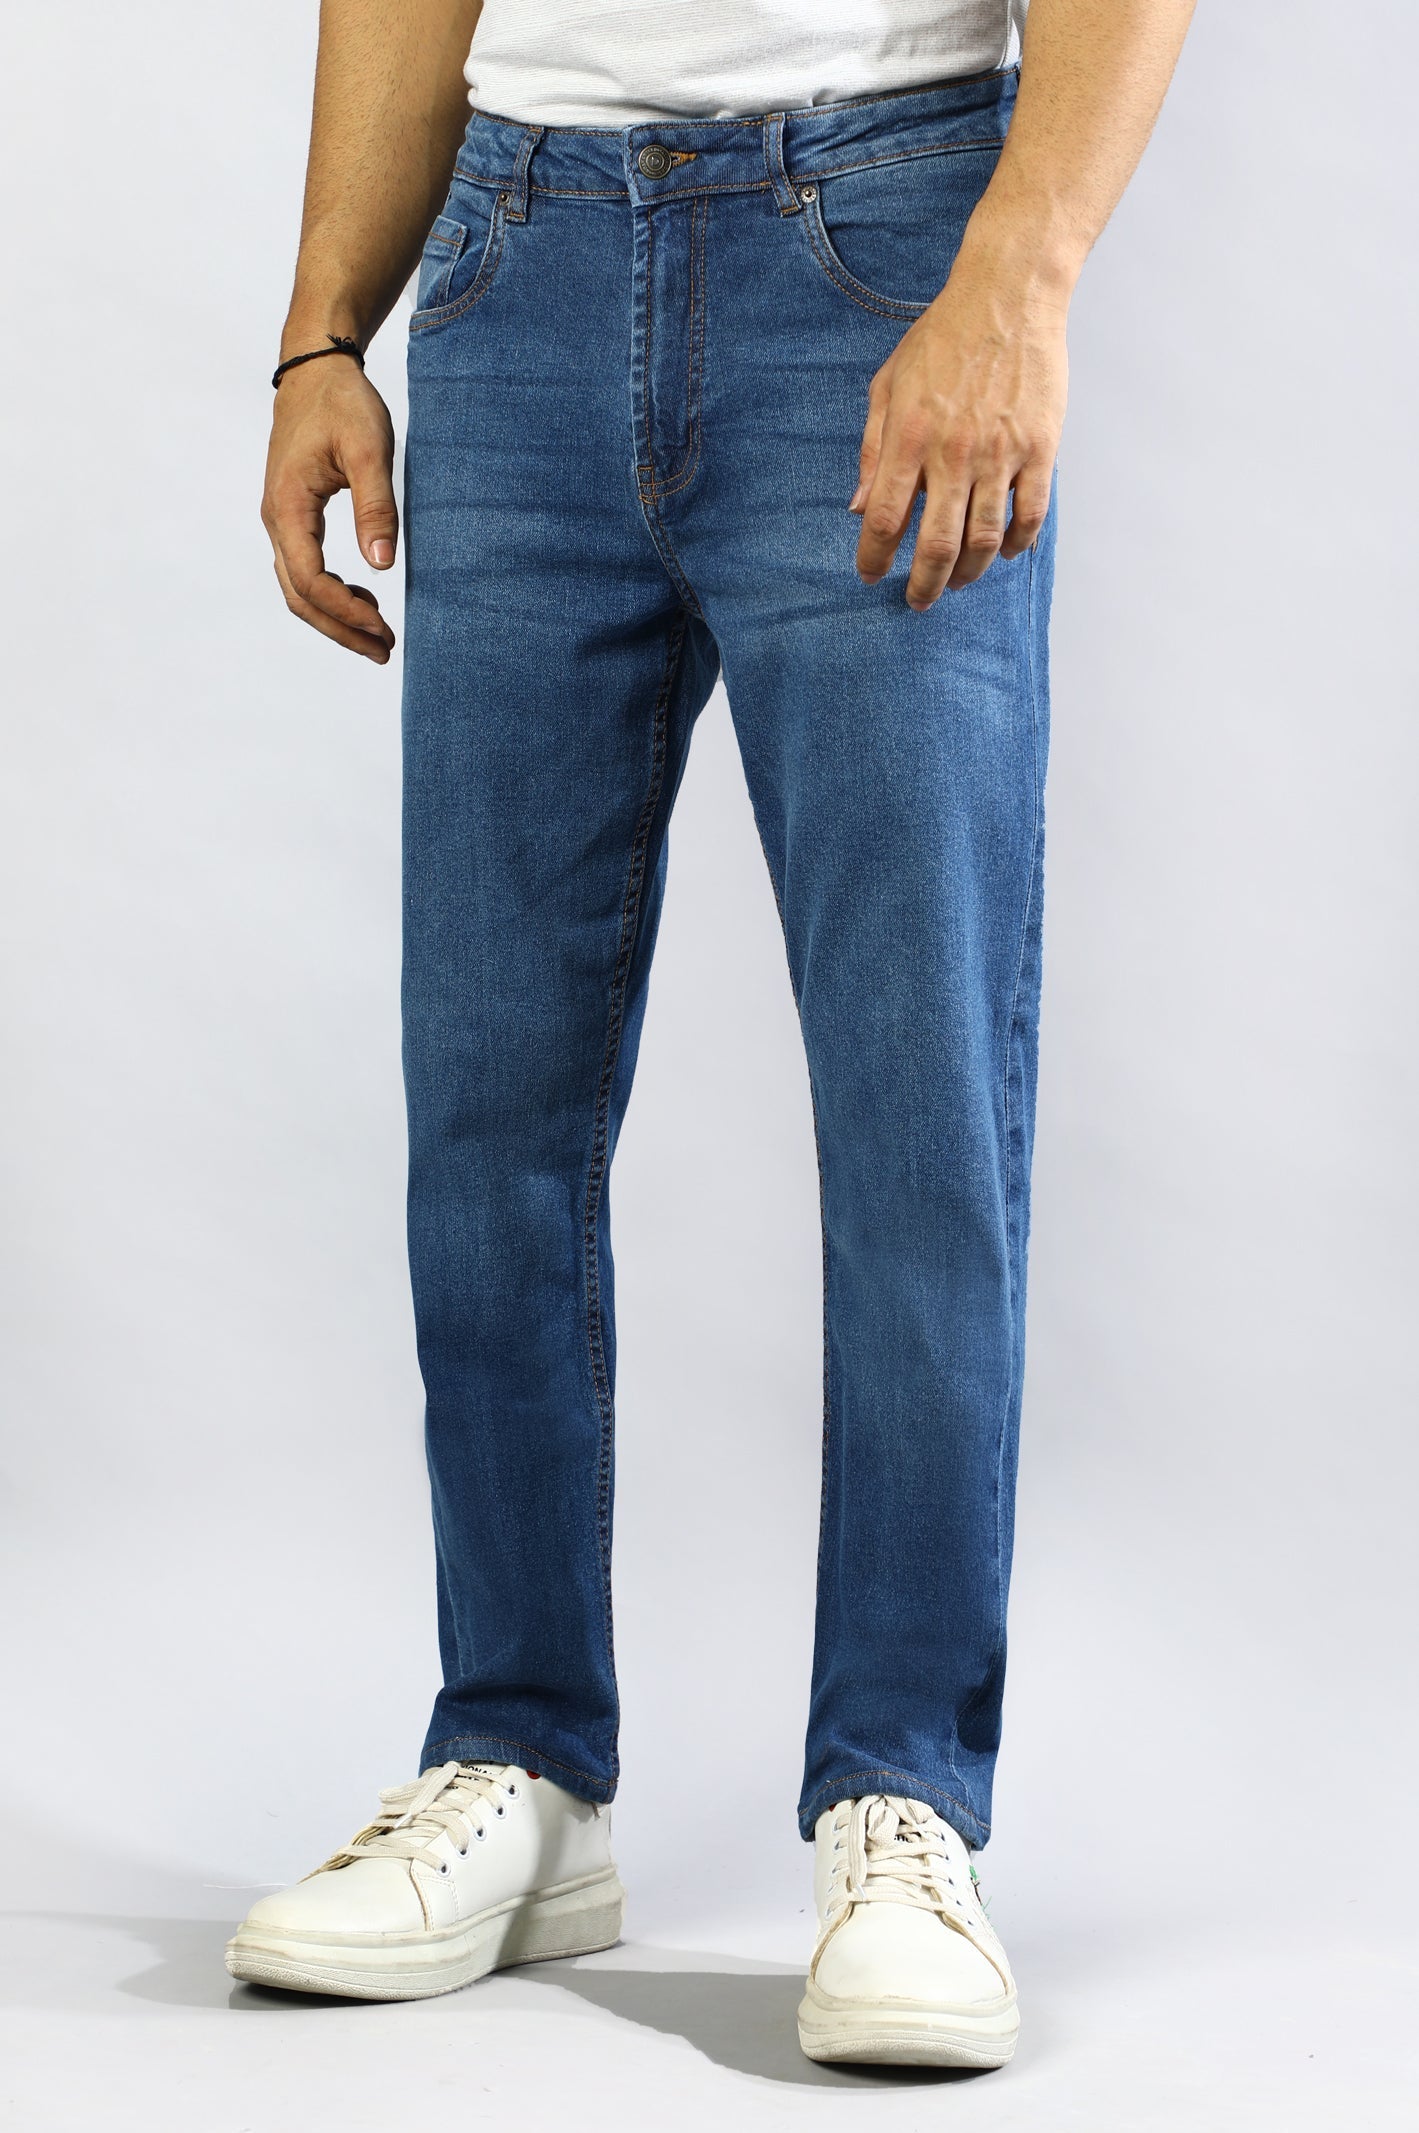 Medium Blue Smart Fit Jeans From Diners